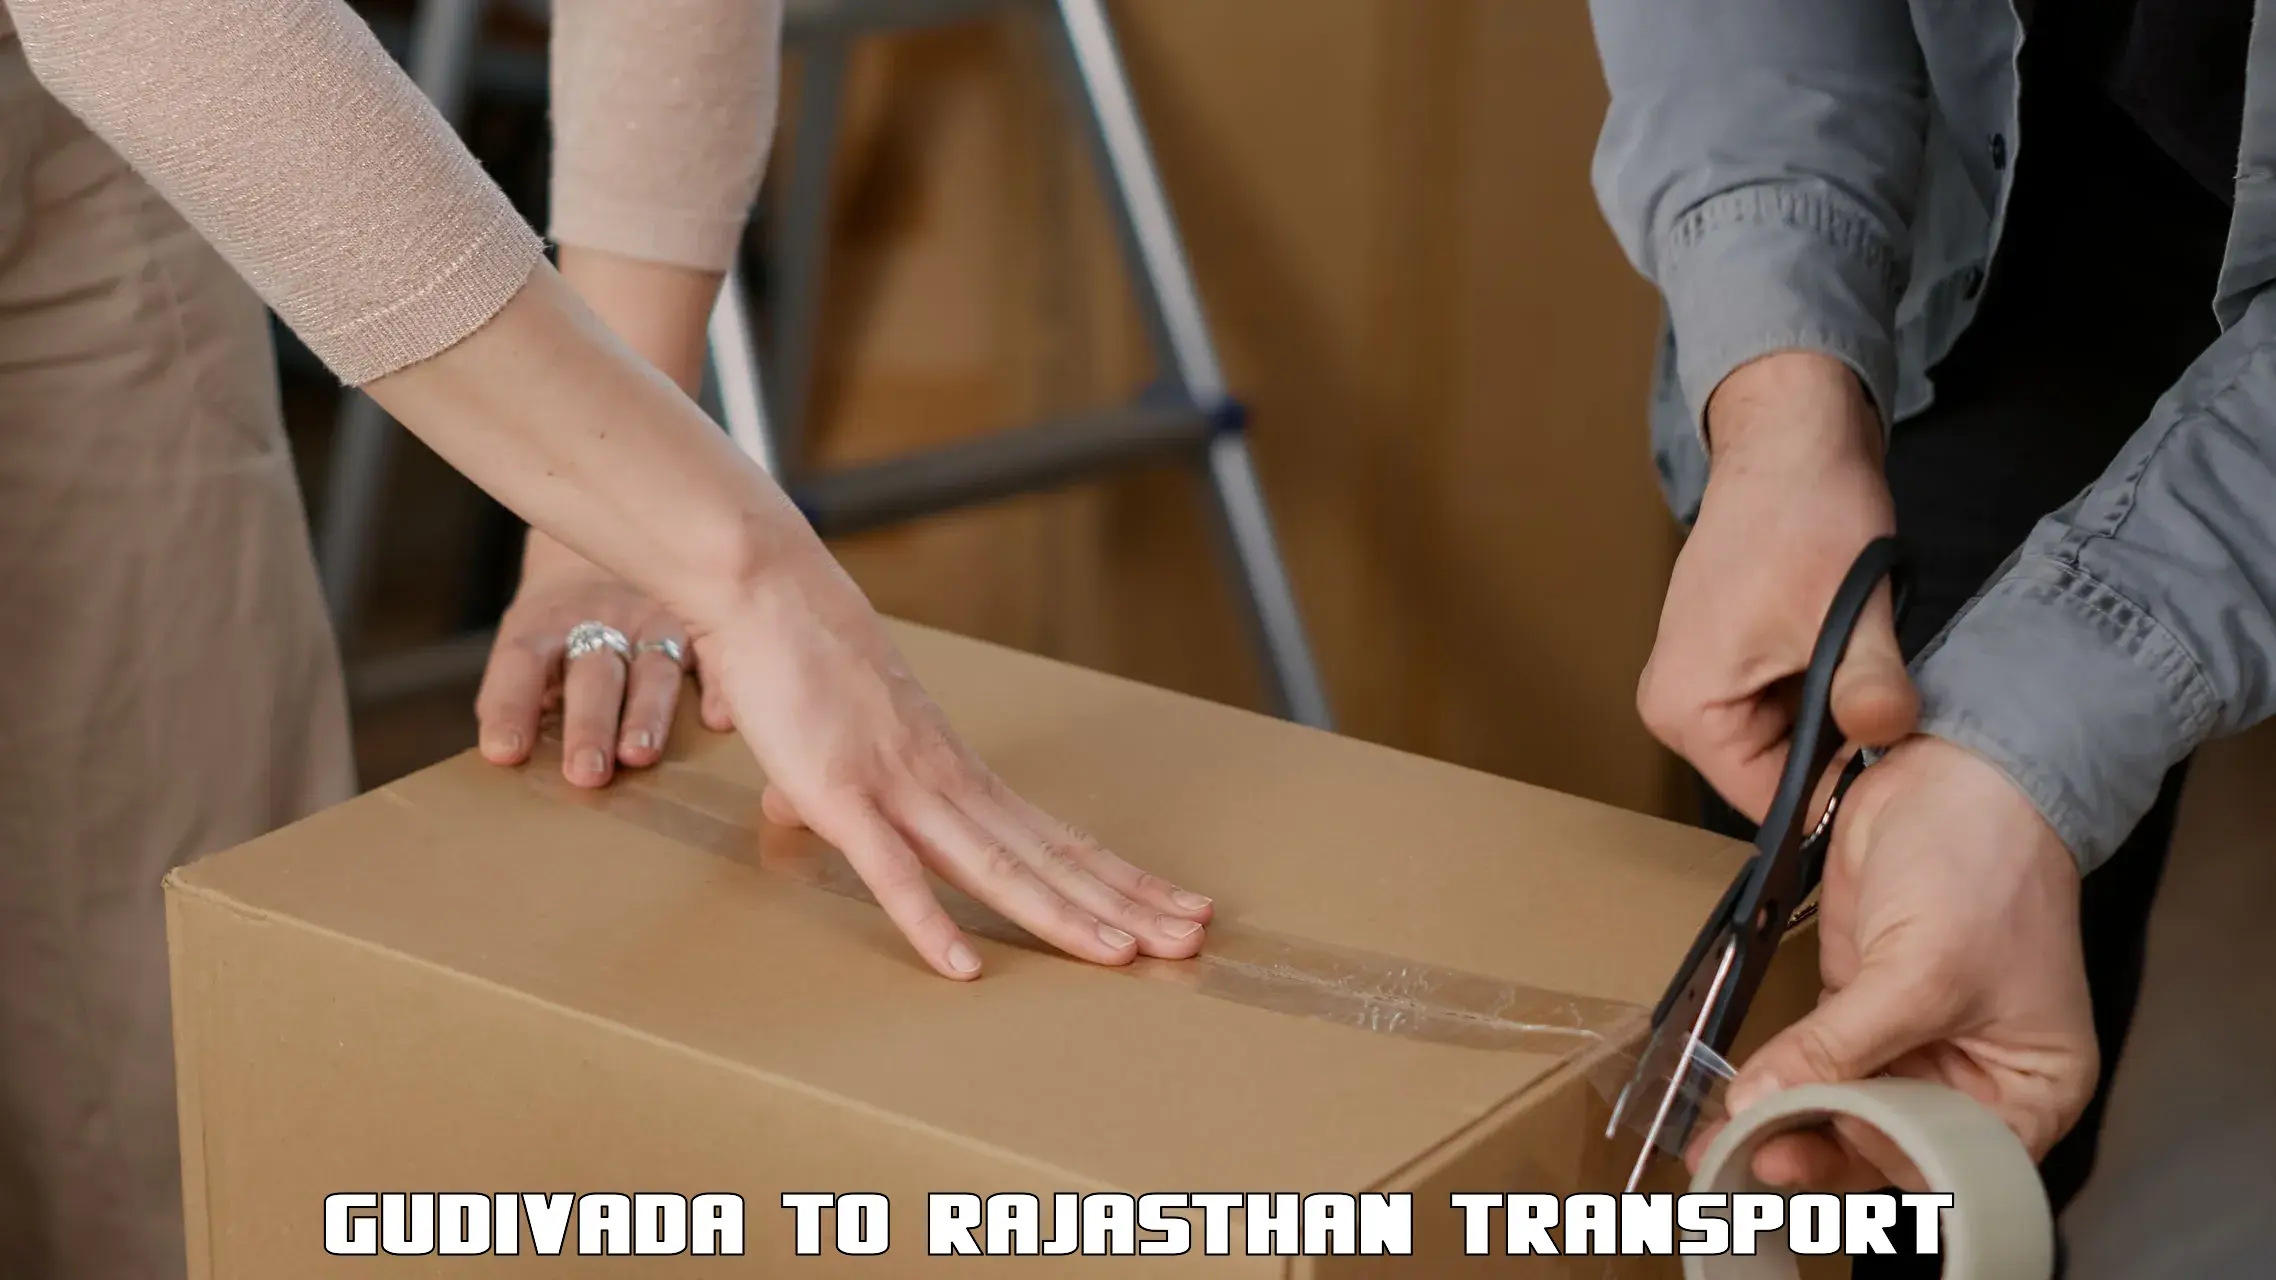 Truck transport companies in India Gudivada to Rajasthan